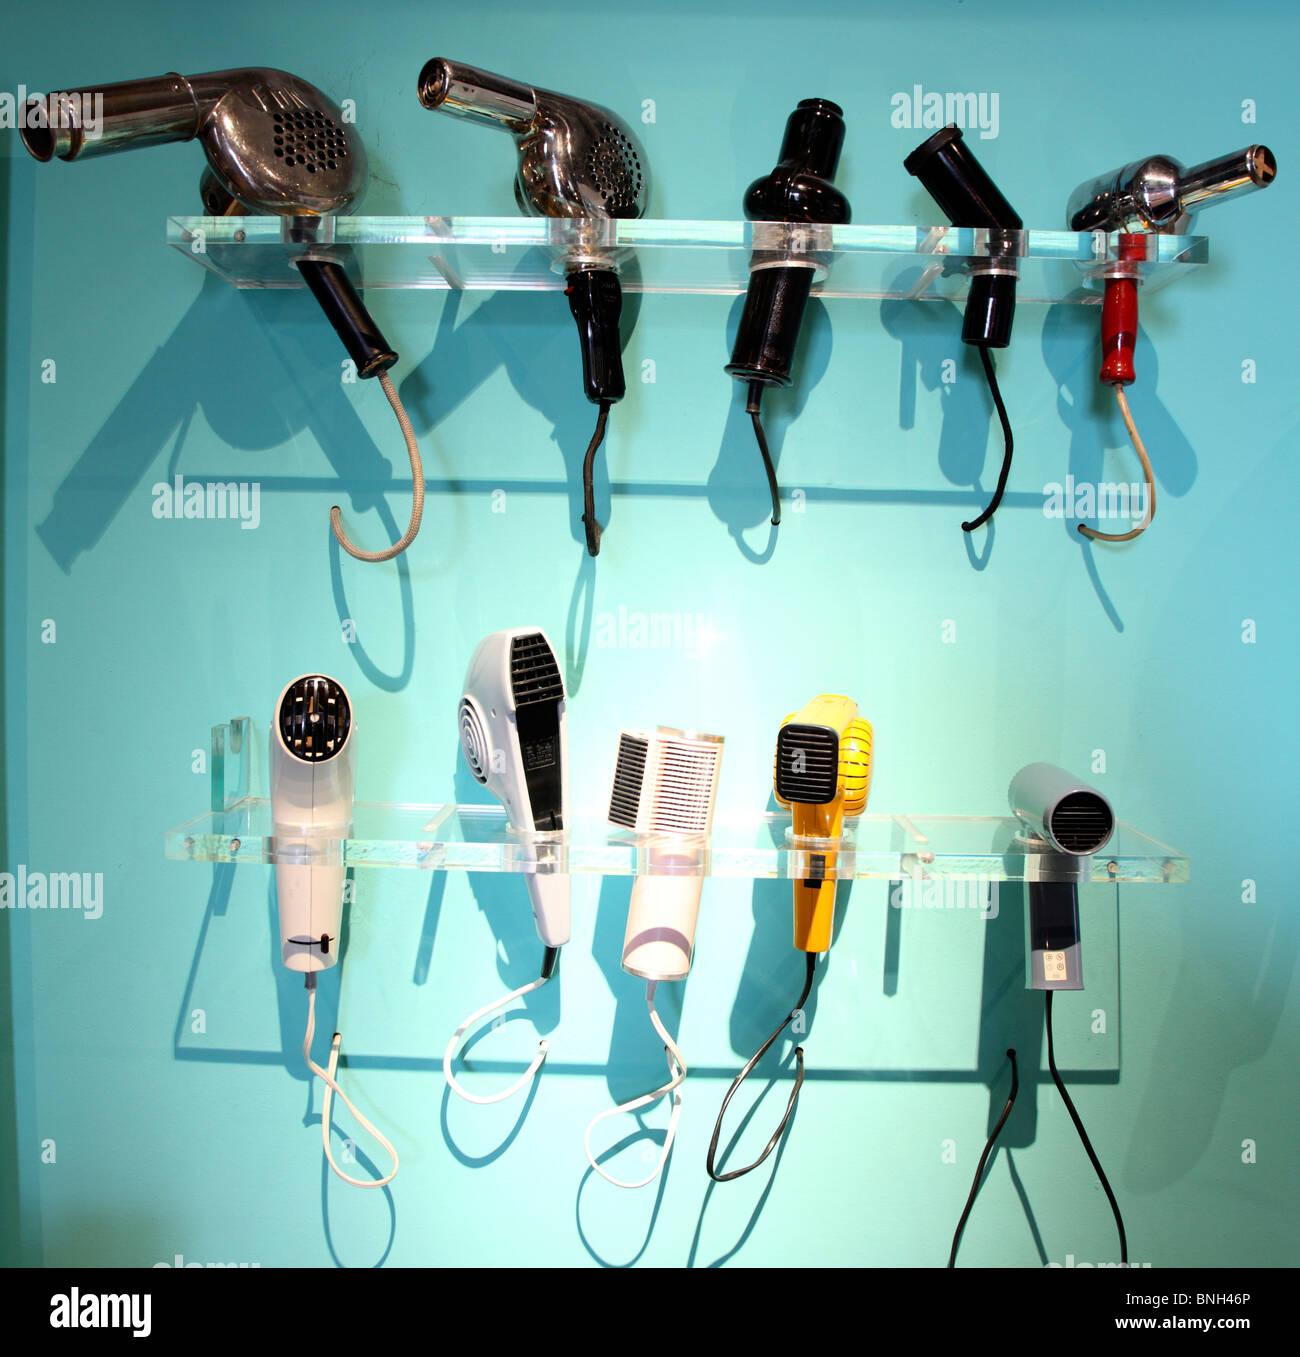 Different types of hairdryer. Stock Photo